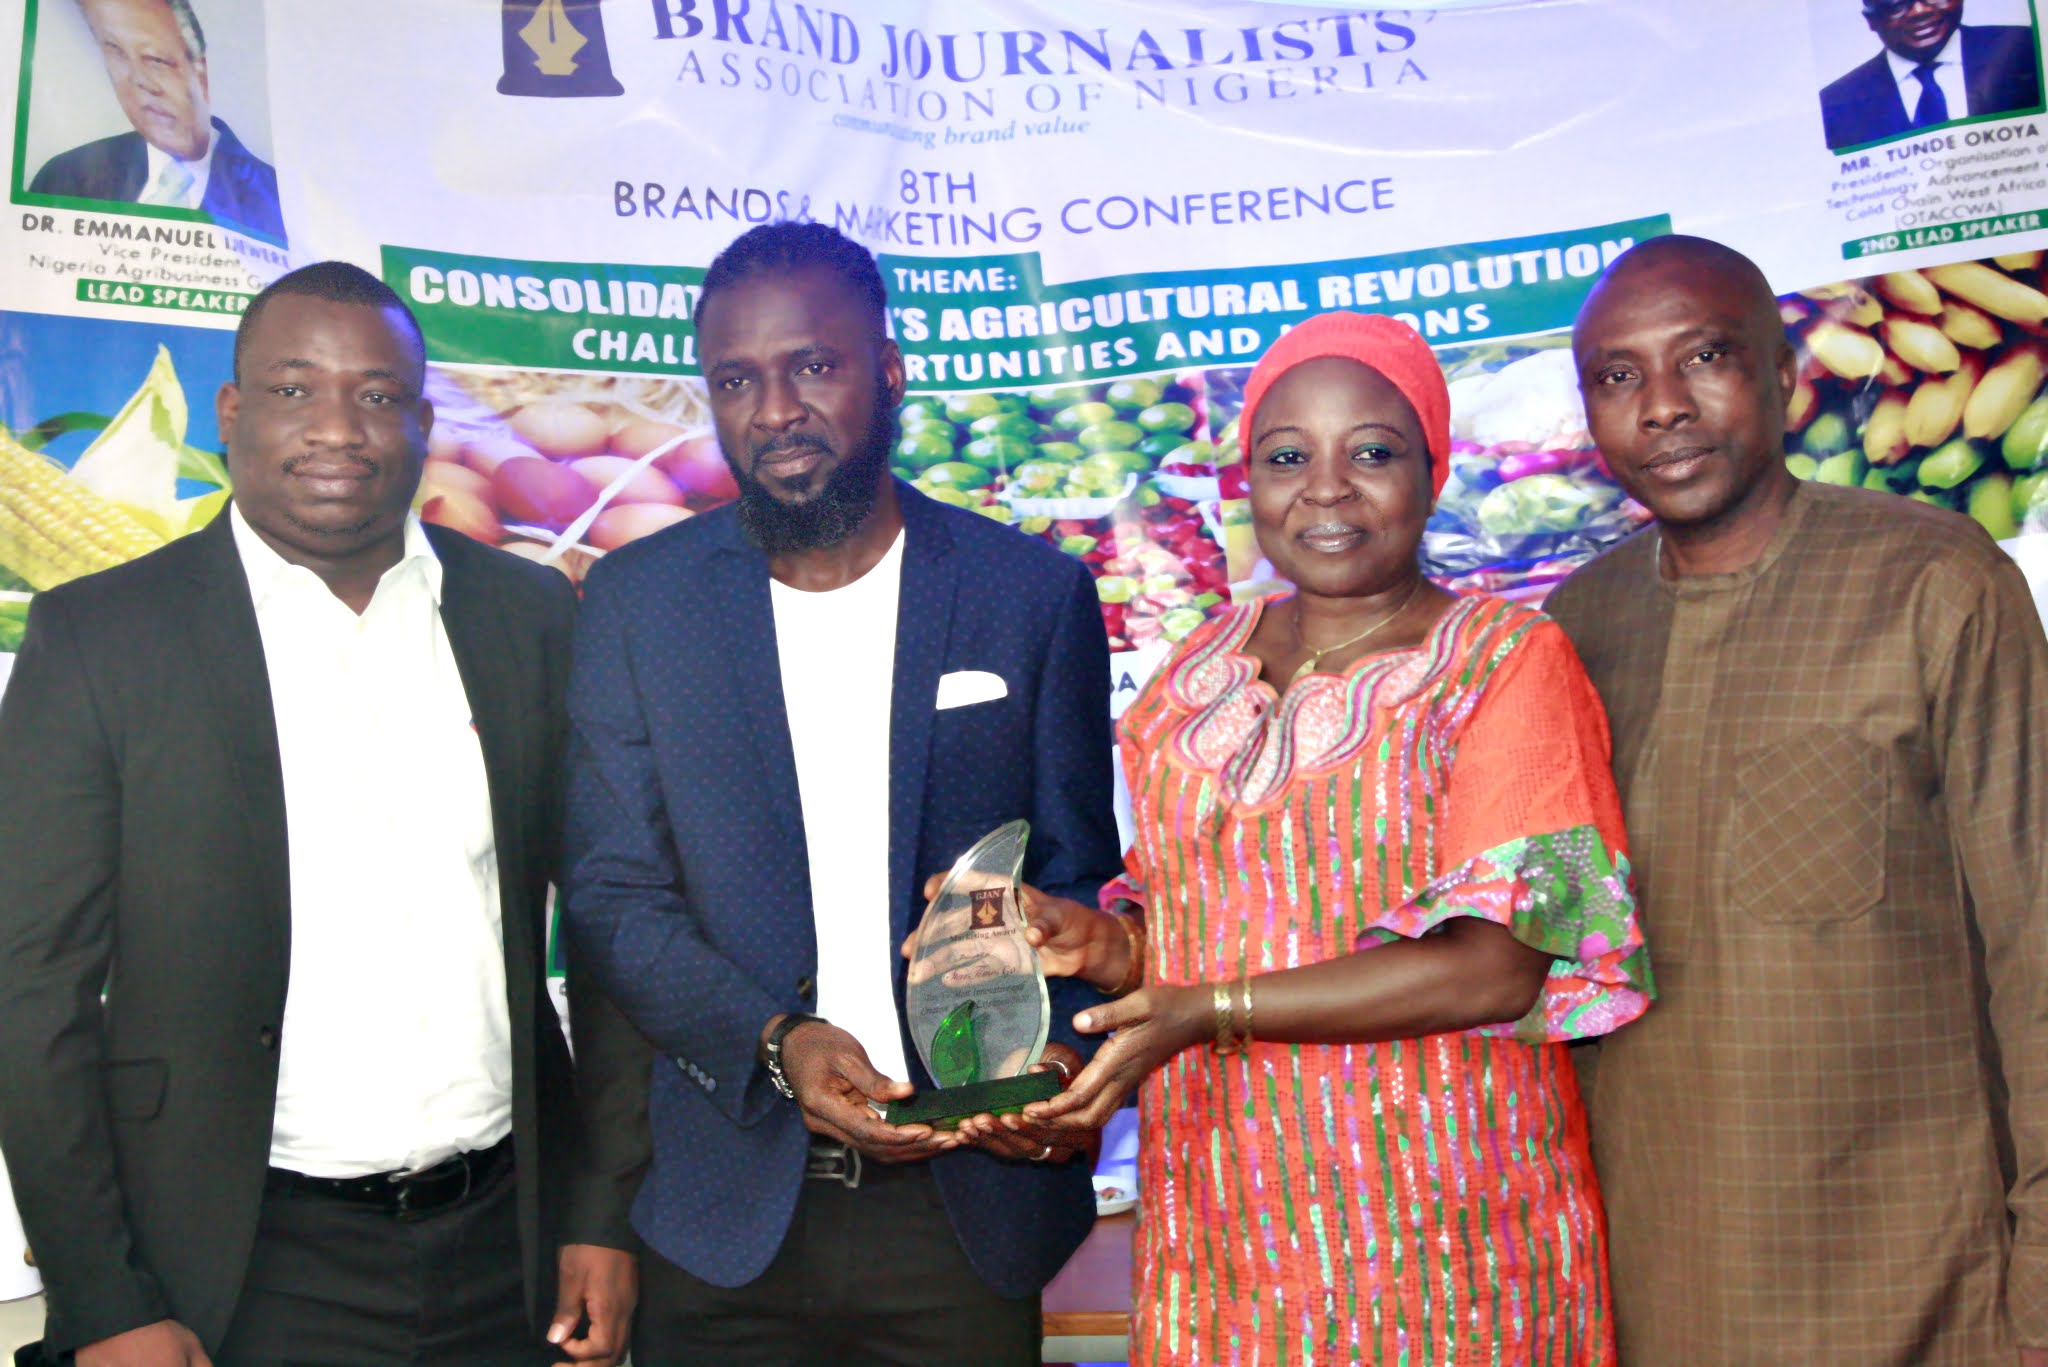 From Left:  PR Manager StarTimes Nigeria, Lazarus Ibeabuchi; National Content Marketing Manager StarTimes Nigeria, Ali Auta; Head Corporate Communications, Advertising Practitioners Council of Nigeria (APCON), Comfort Maryam and Chairman, Brand Journalists’ Association of Nigeria (BJAN), Princewill Ekwujuru at the 8th  Brands and Marketing conference in Lagos 